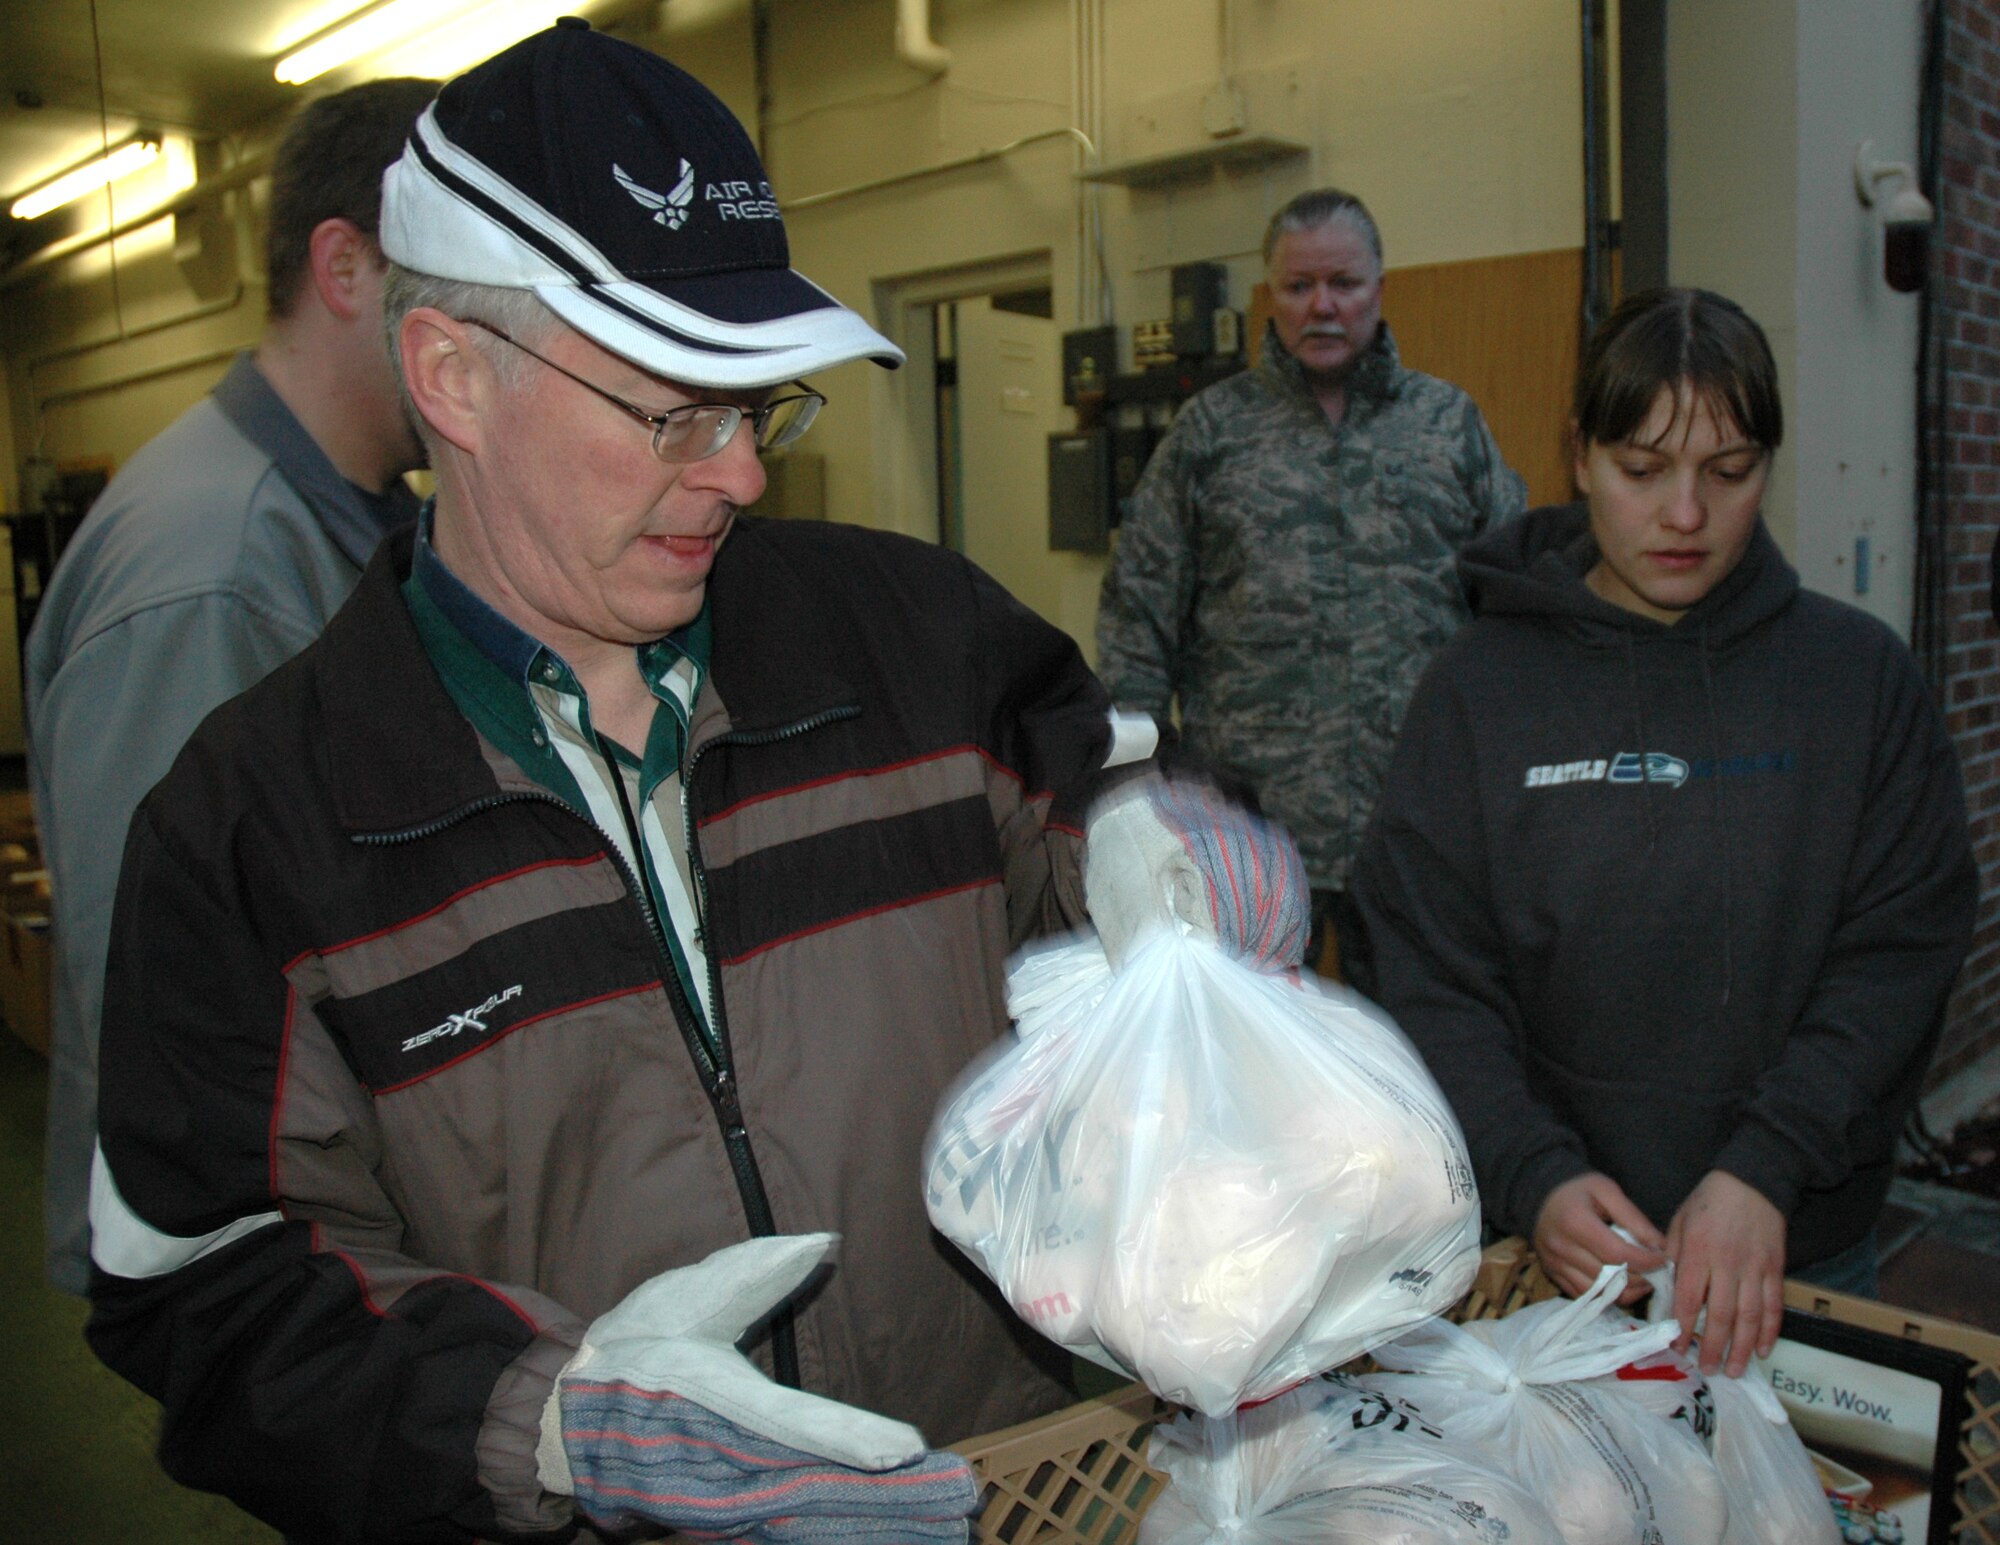 TACOMA, Wash.- 446th Mission Support Squadron Airman and Family Readiness Center, McChord Air Force Base, Wash. director, Carl Supplee, left, helps load bags of potatoes along with, Tech. Sgt. Rick Martini, center, 446th MSS Airman and Family Readiness assistant, and Tami Klube, a firefighter with Central Pierce County Fire and Rescue here on to a truck. The potatoes, along with, milk, ham, and boxes of non-perishable goods were collected by CPFR and given to the Airman and Family Readiness Center to be distributed to needy Reserve families at McChord AFB. The Airman and Family Readiness Center has been working with CPFR for about the last five years to help give families in need some extra food for the holidays. (U.S. Air Force photo/Master Sgt. Jake Chappelle)